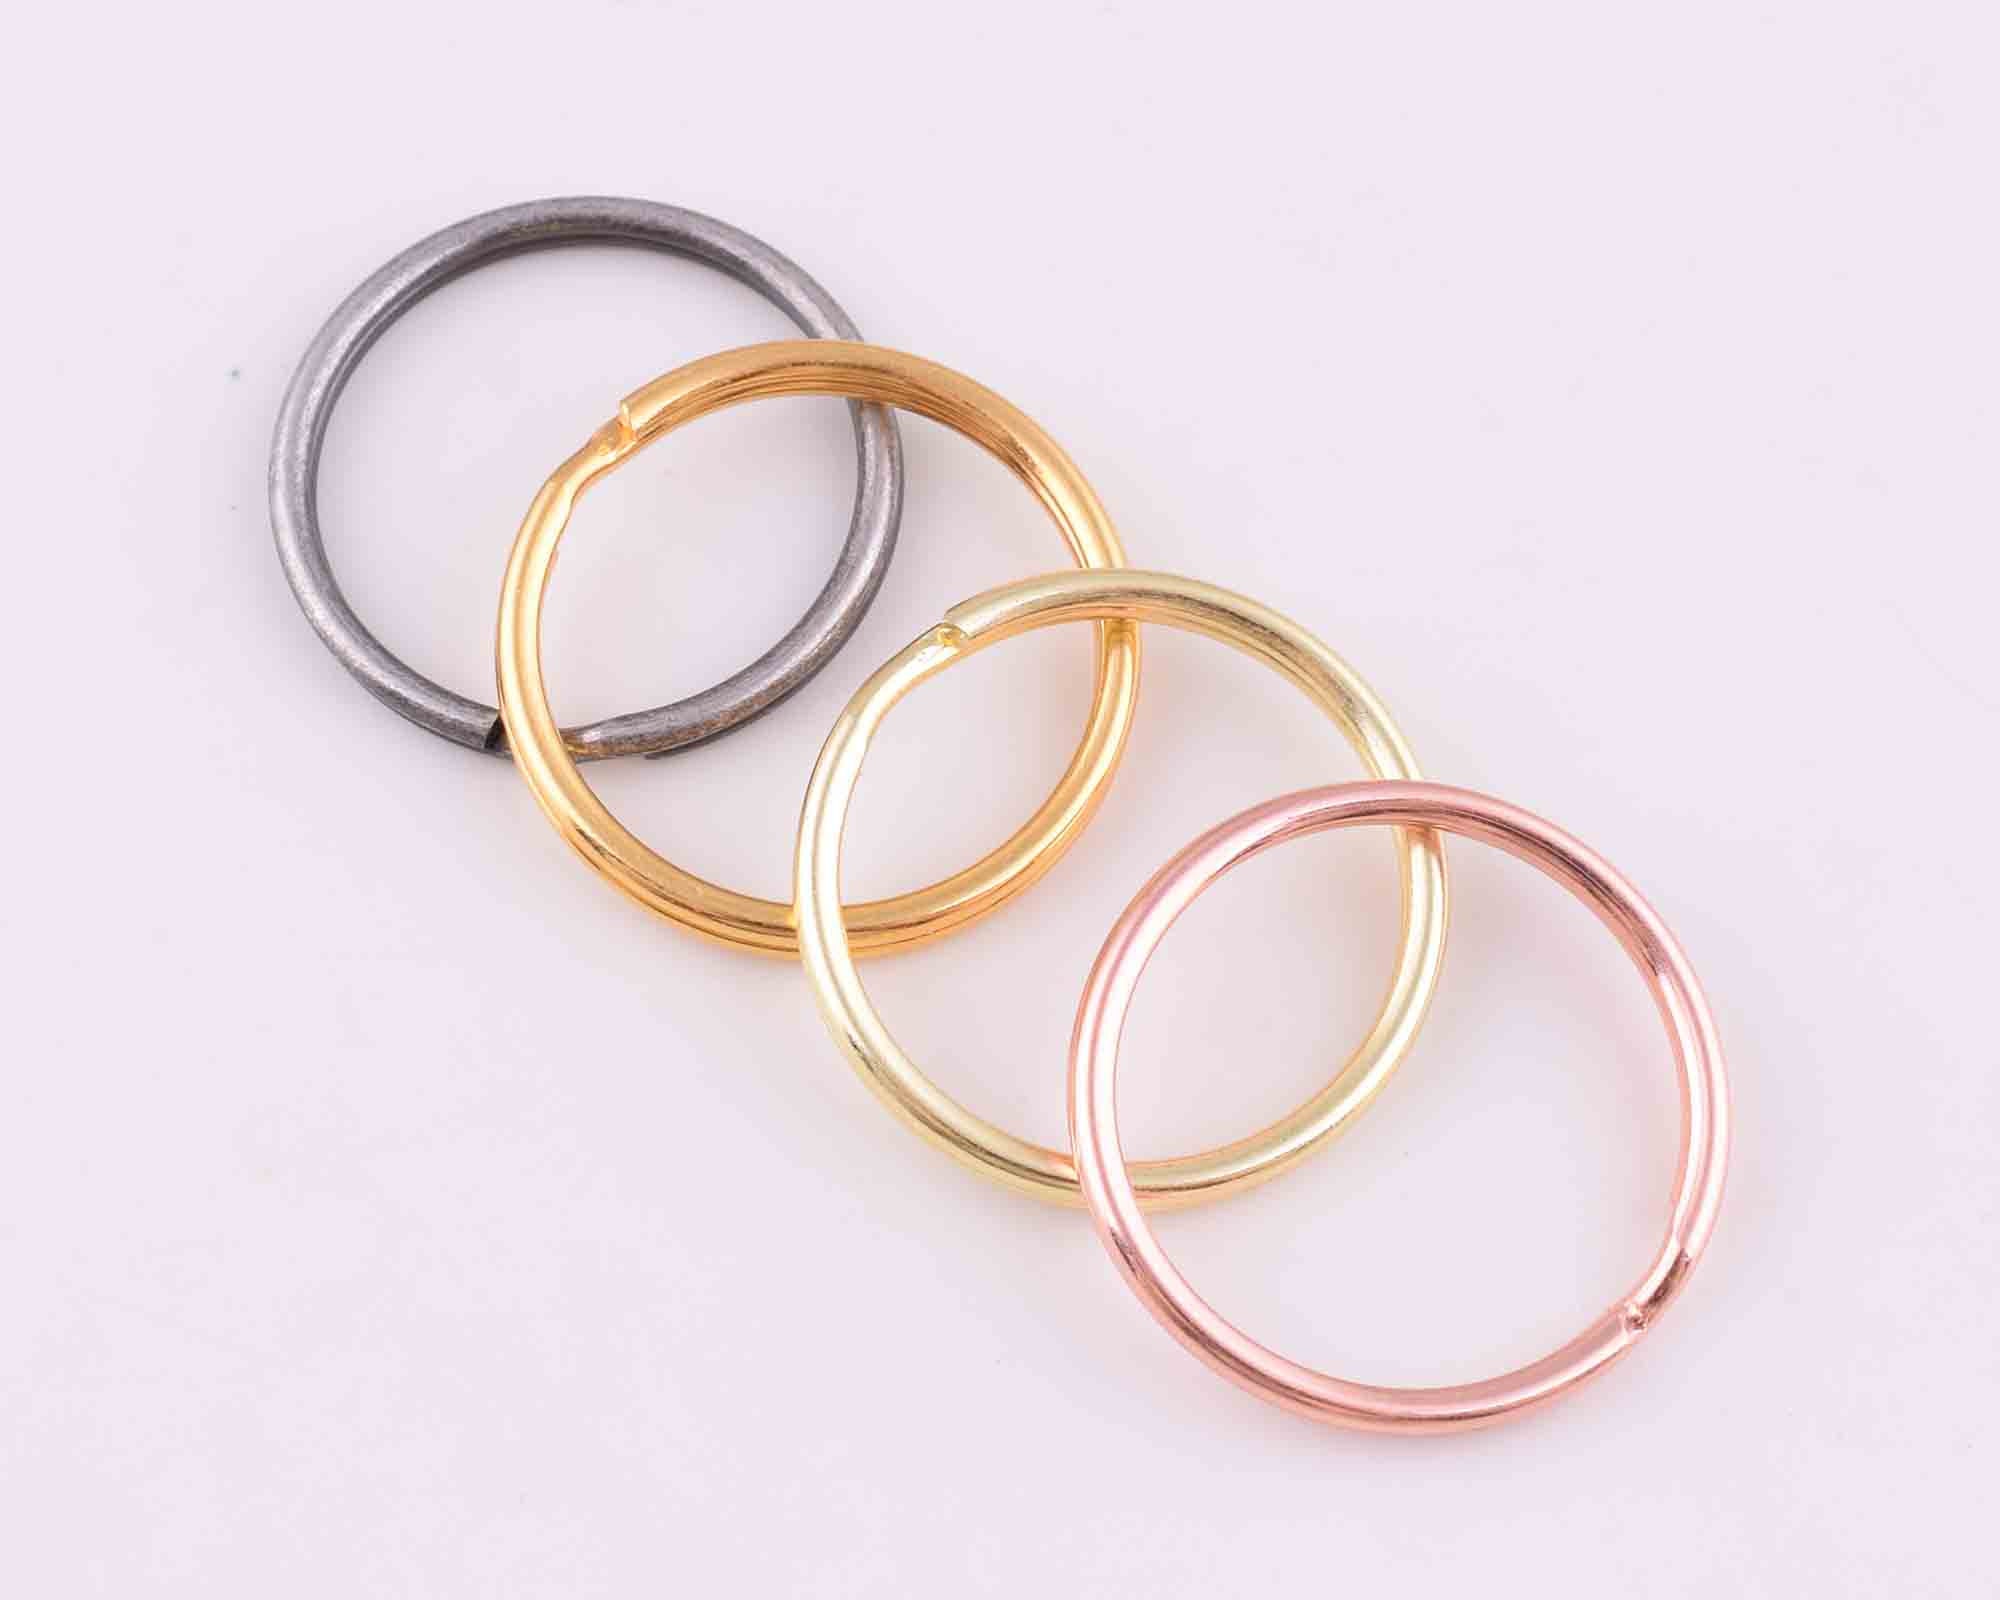 10 pcs/lot Key Ring Key Chain 60mm Long Round Split Keychain with Chain and  Jump Rings Jewelry Making Bulk Supplies 3 Sizes (Kc Gold, 30mm(1.18inch))